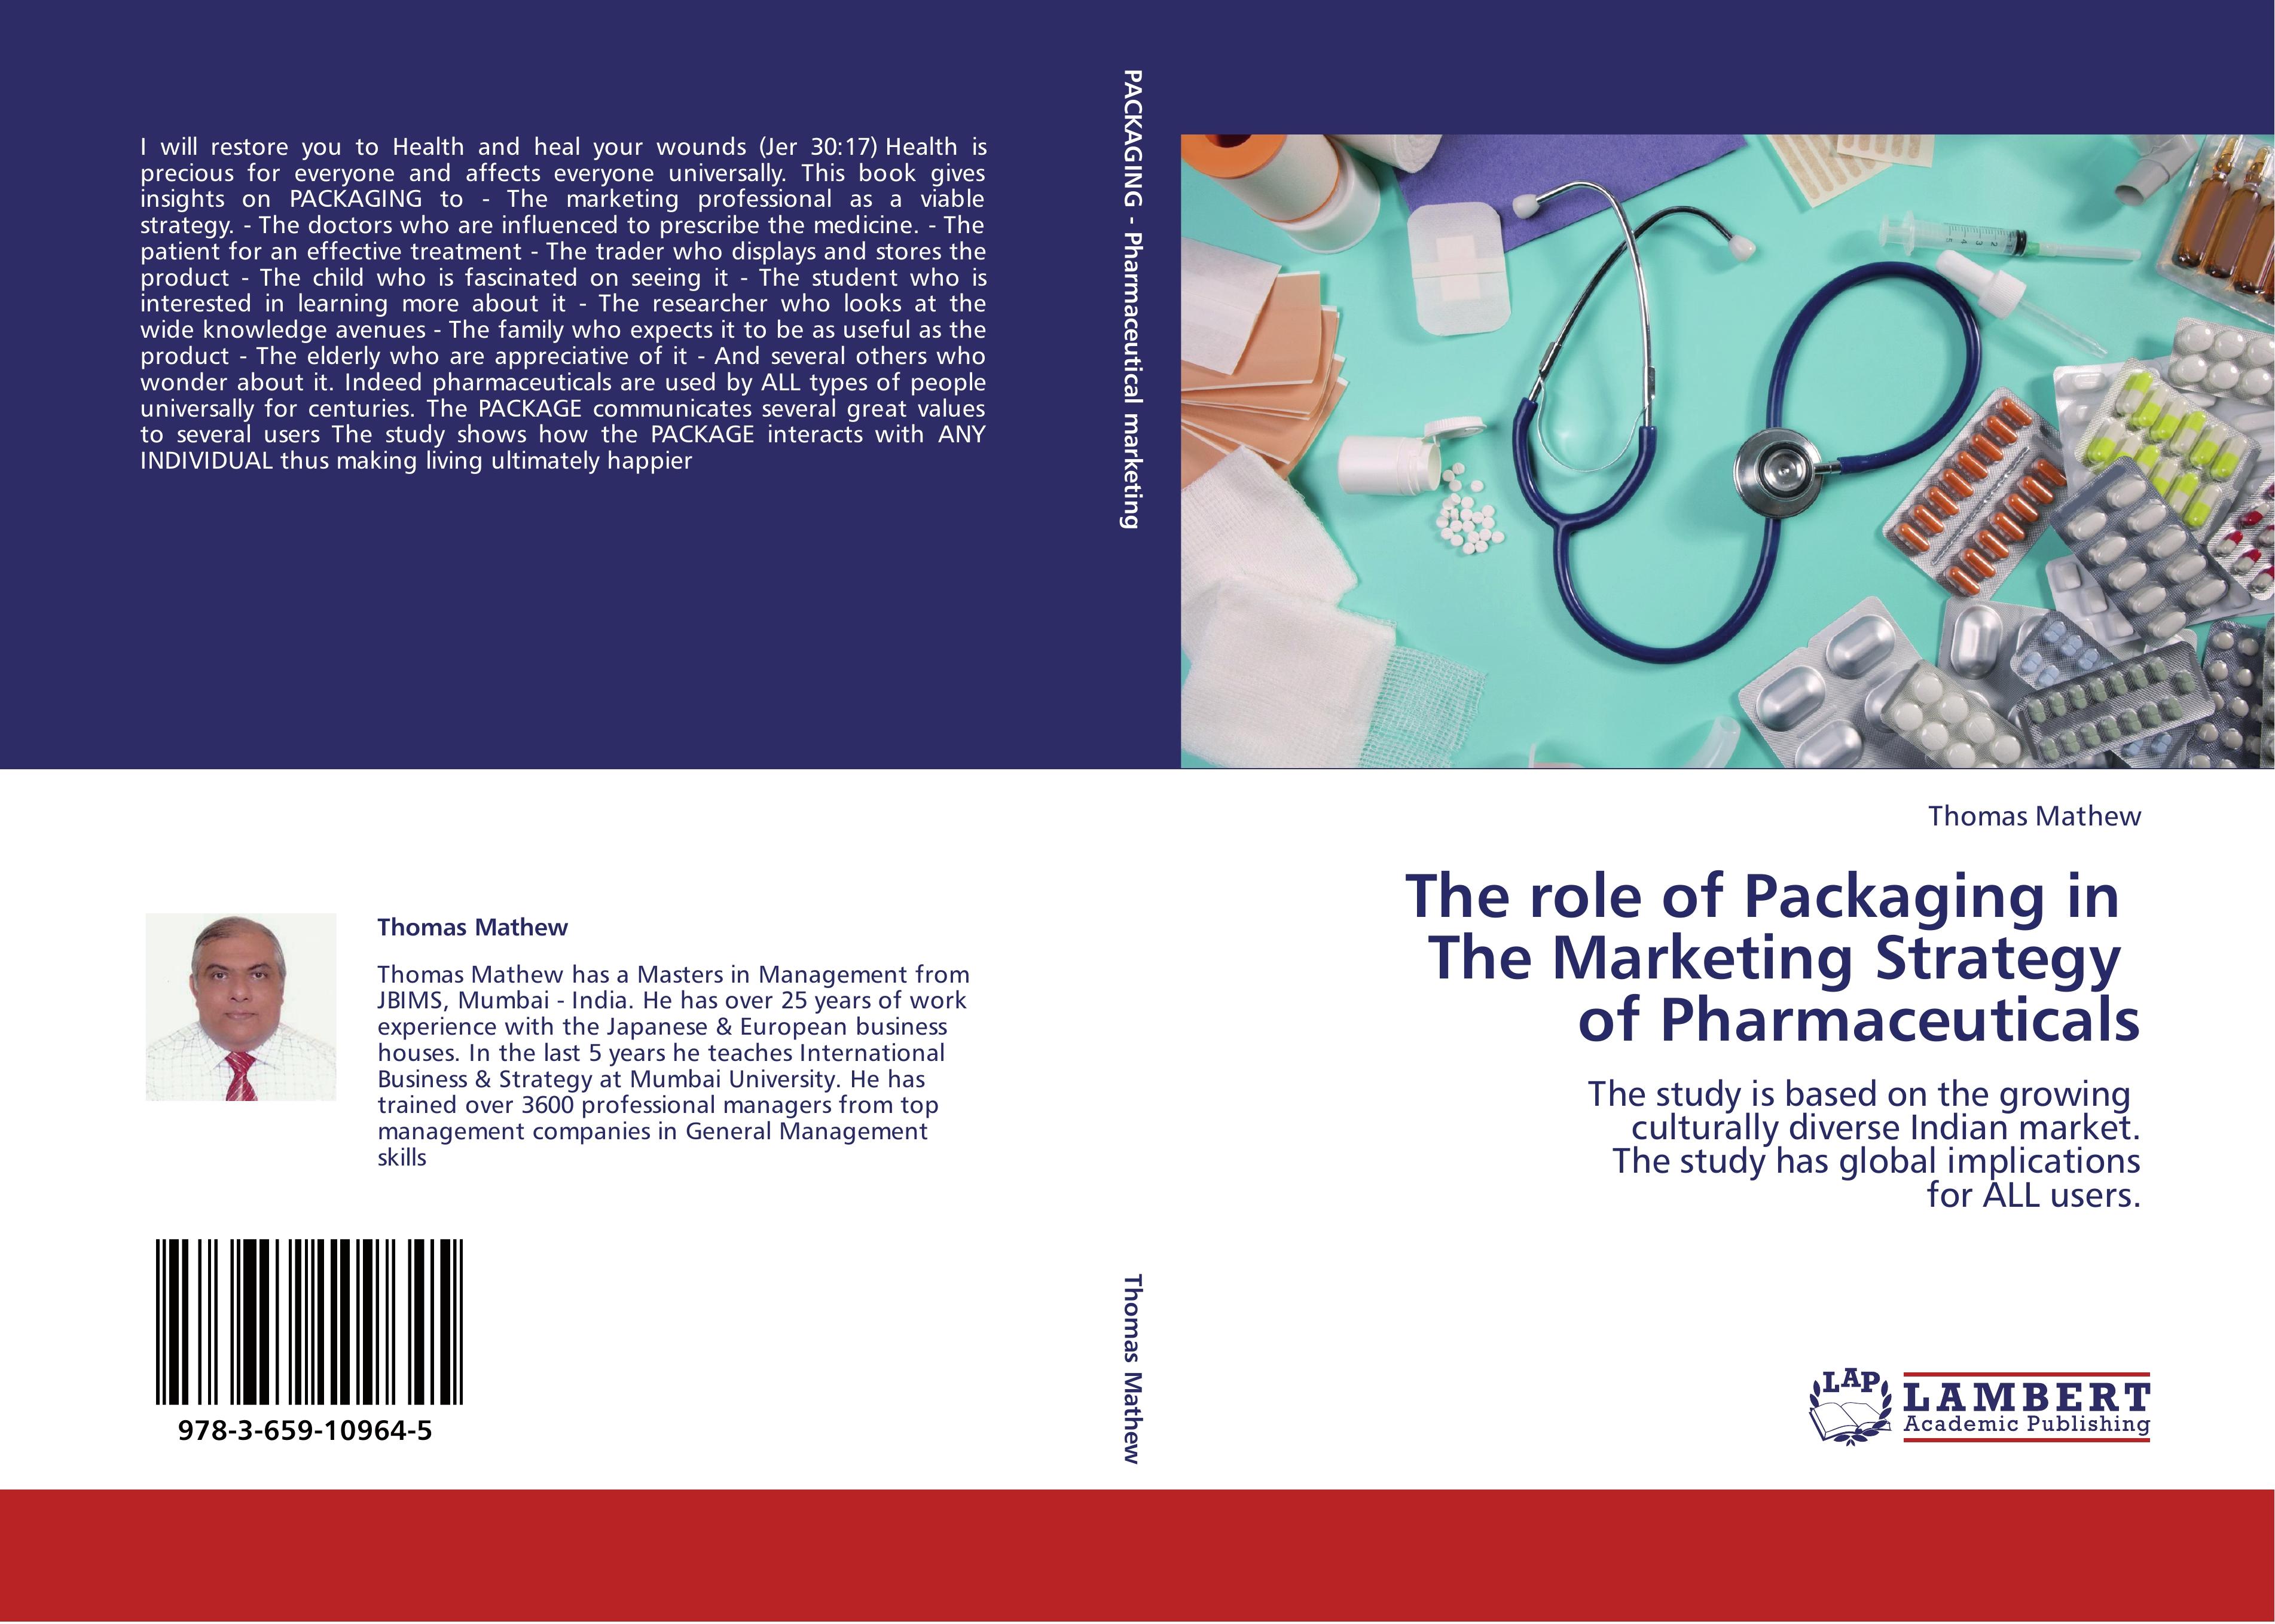 The role of Packaging in The Marketing Strategy of Pharmaceuticals - Thomas Mathew